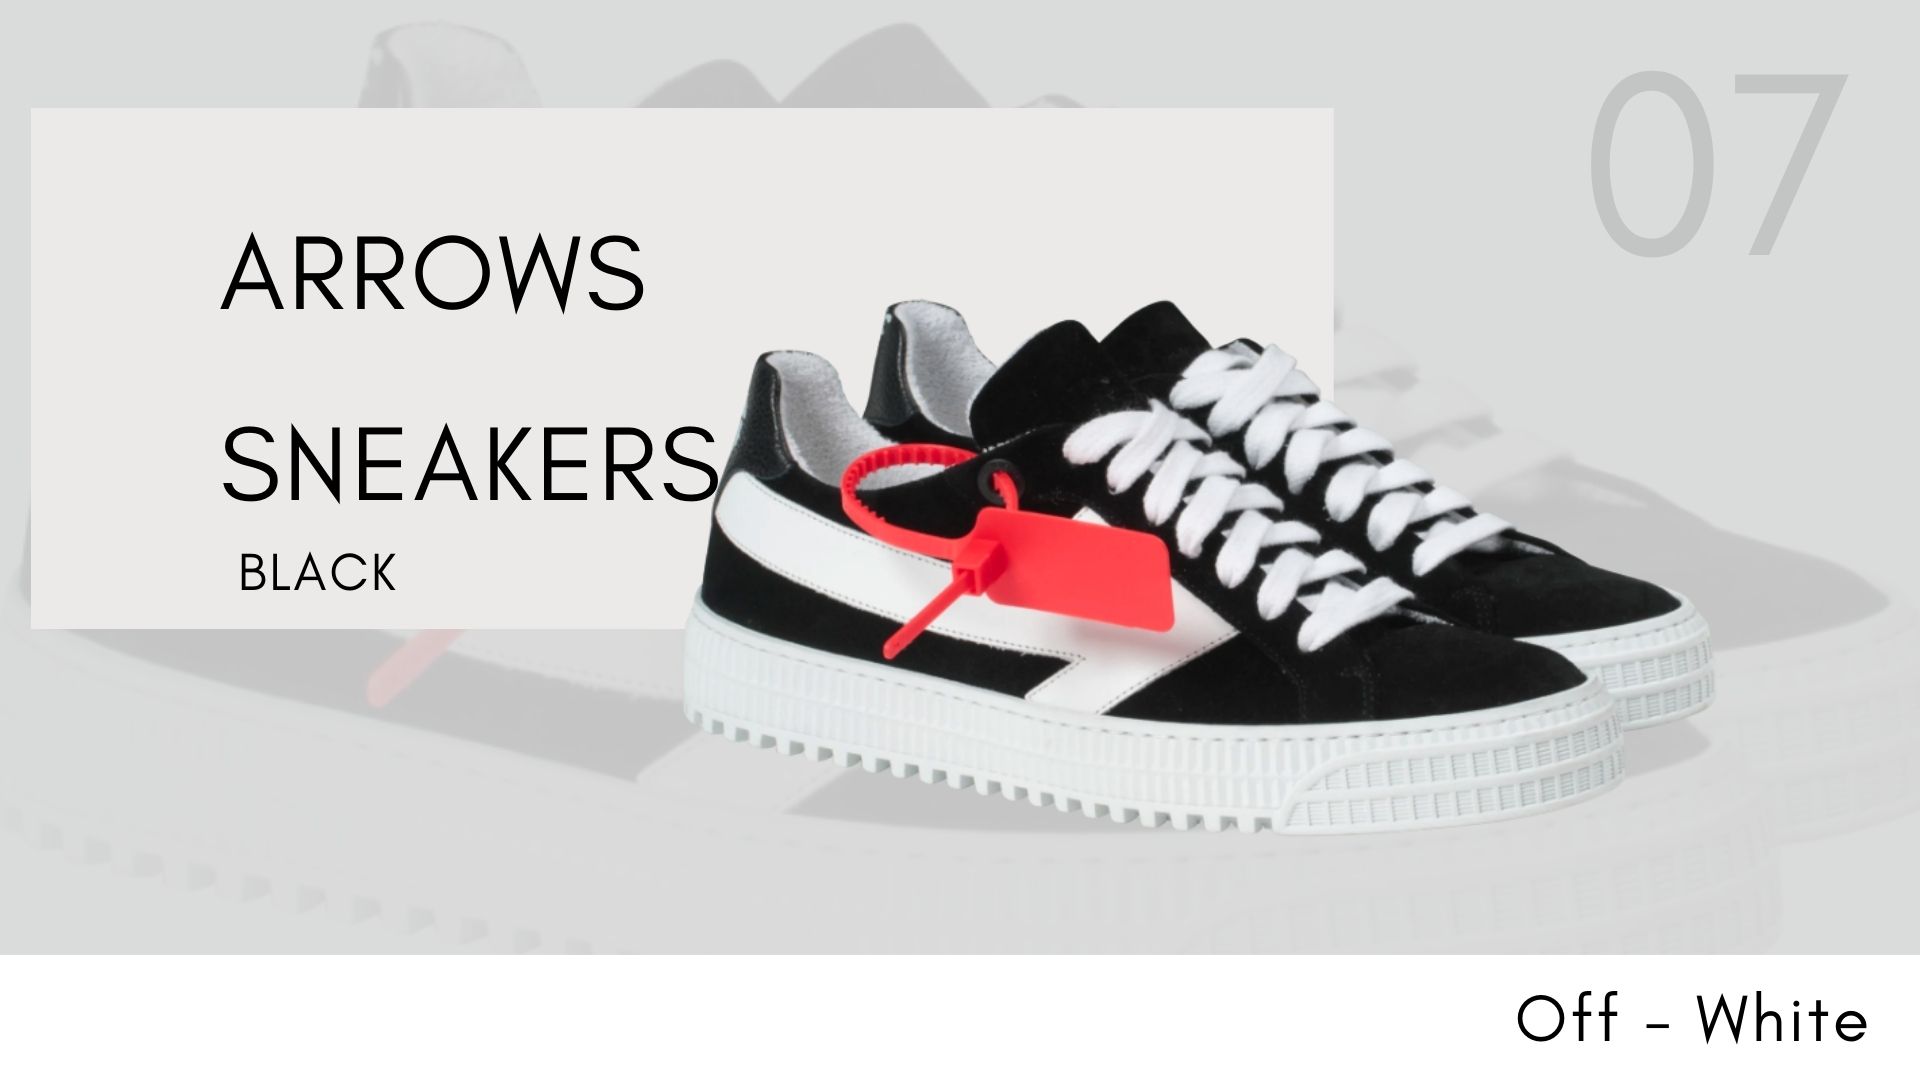 Off-White Sneaker รวมฮิตมาแรง ARROWS SNEAKERS